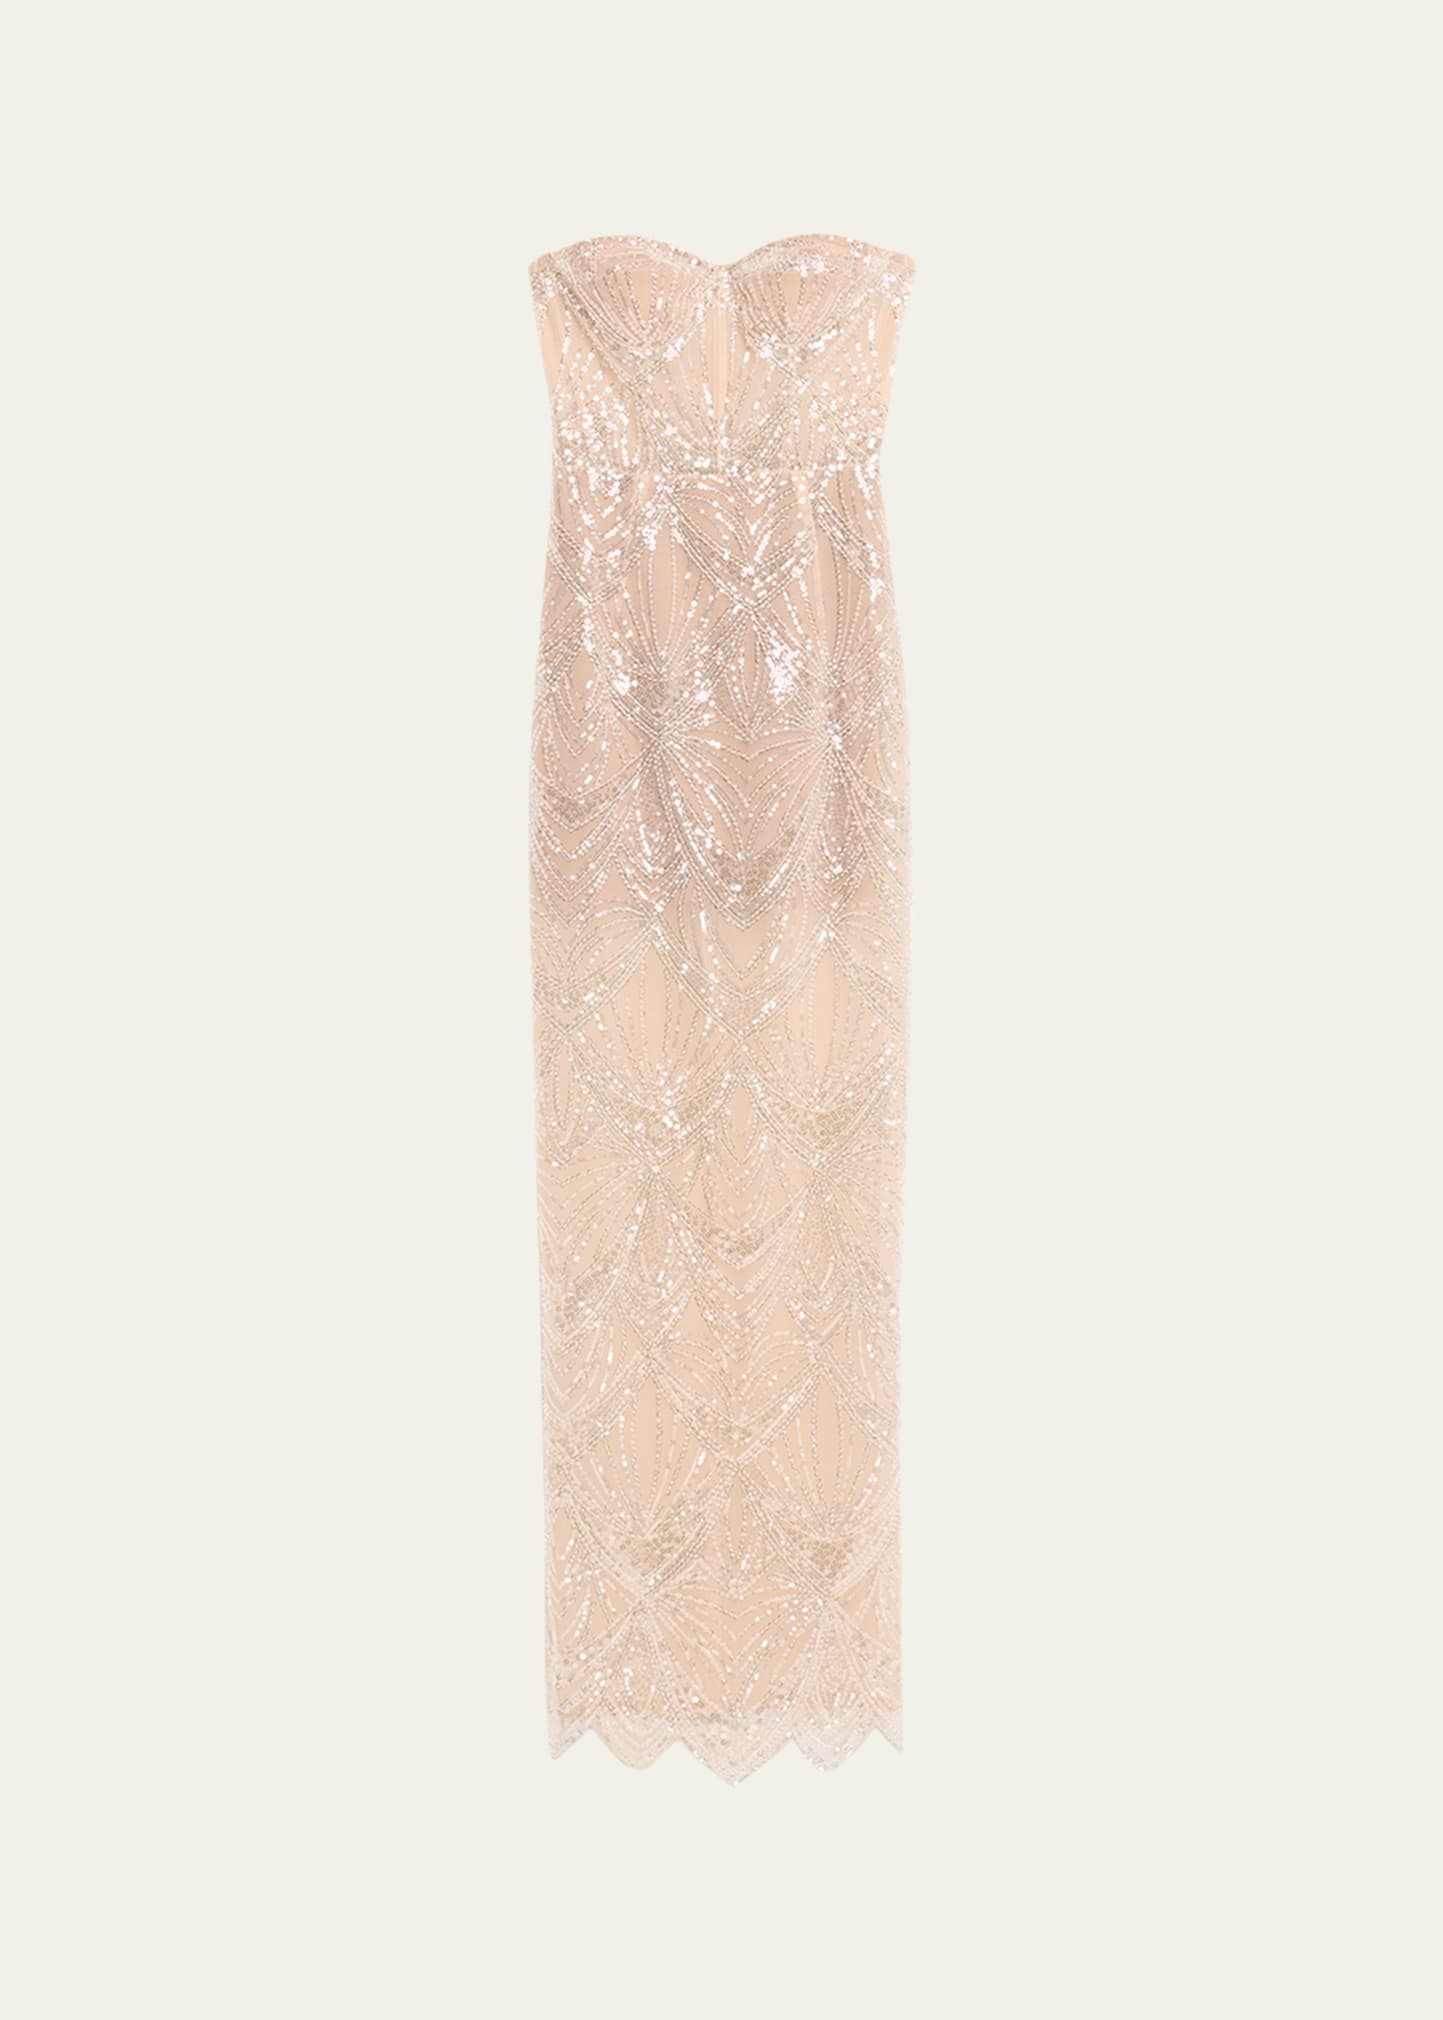 Giselle Blanc Strapless Bead & Sequin Gown